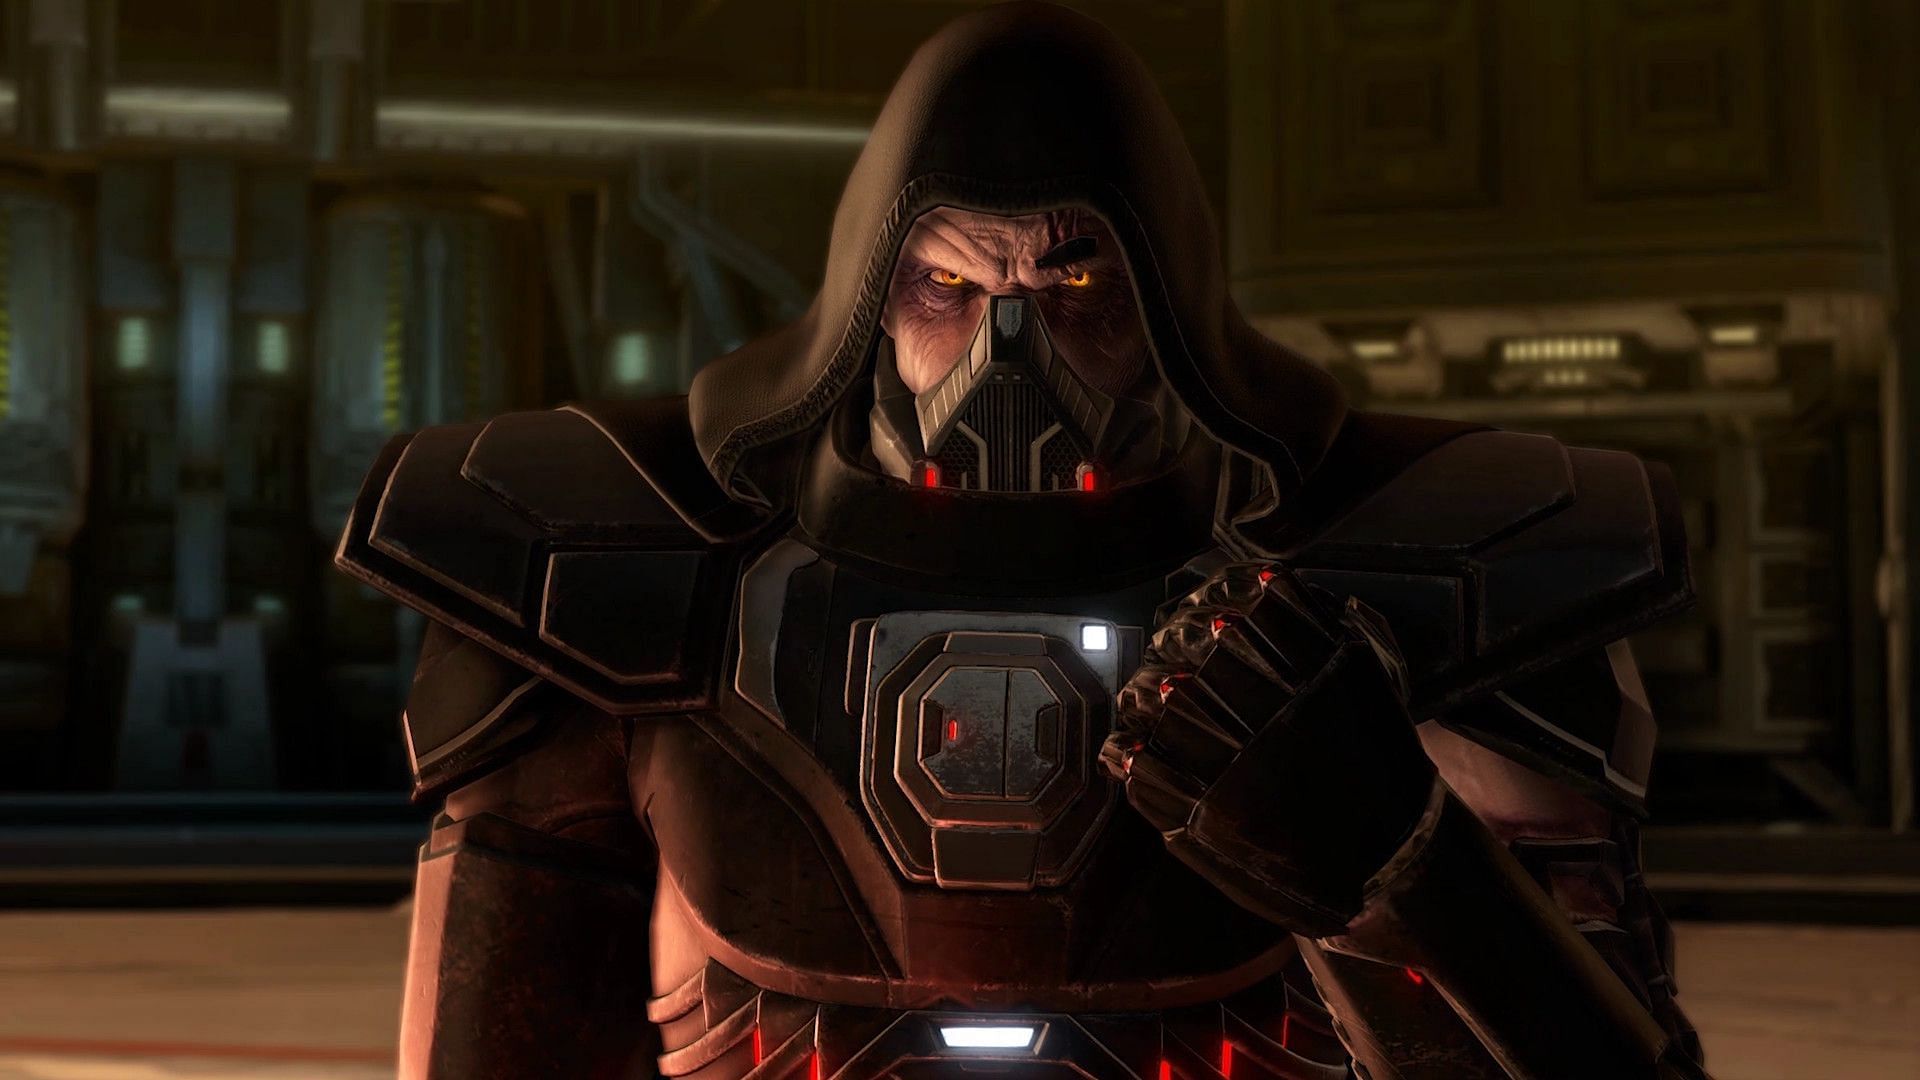 Star Wars: The Old Republic lets you choose between Jedi or Sith (Image via Electronic Arts)